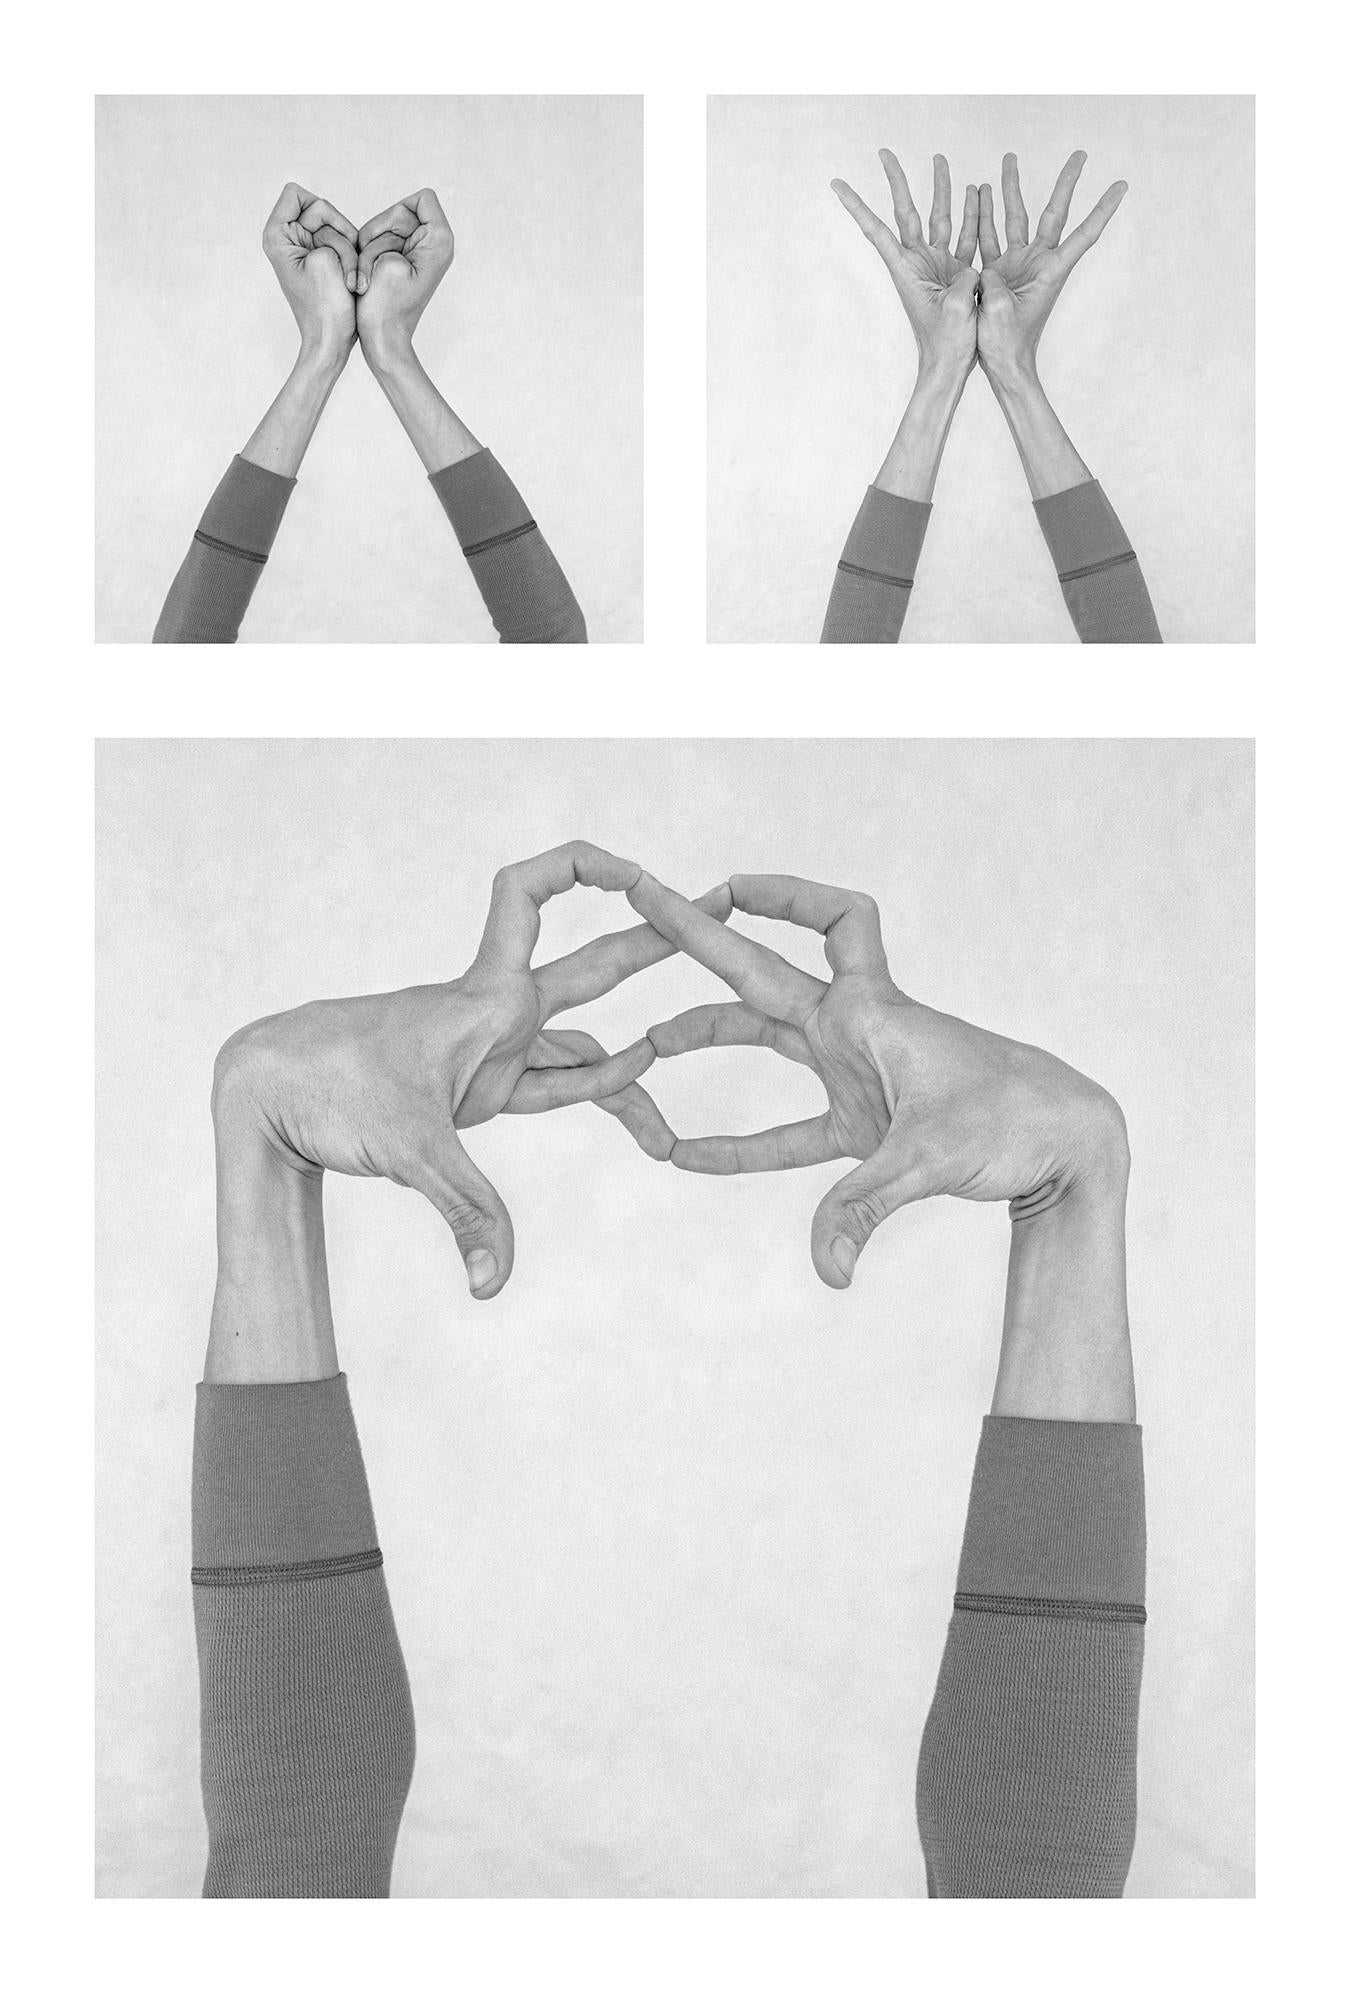 Nico Baixas / Gos-com-fuig Black and White Photograph - Untitled XVI, XVII, and XVIII From the Series Chiromorphose. Hands